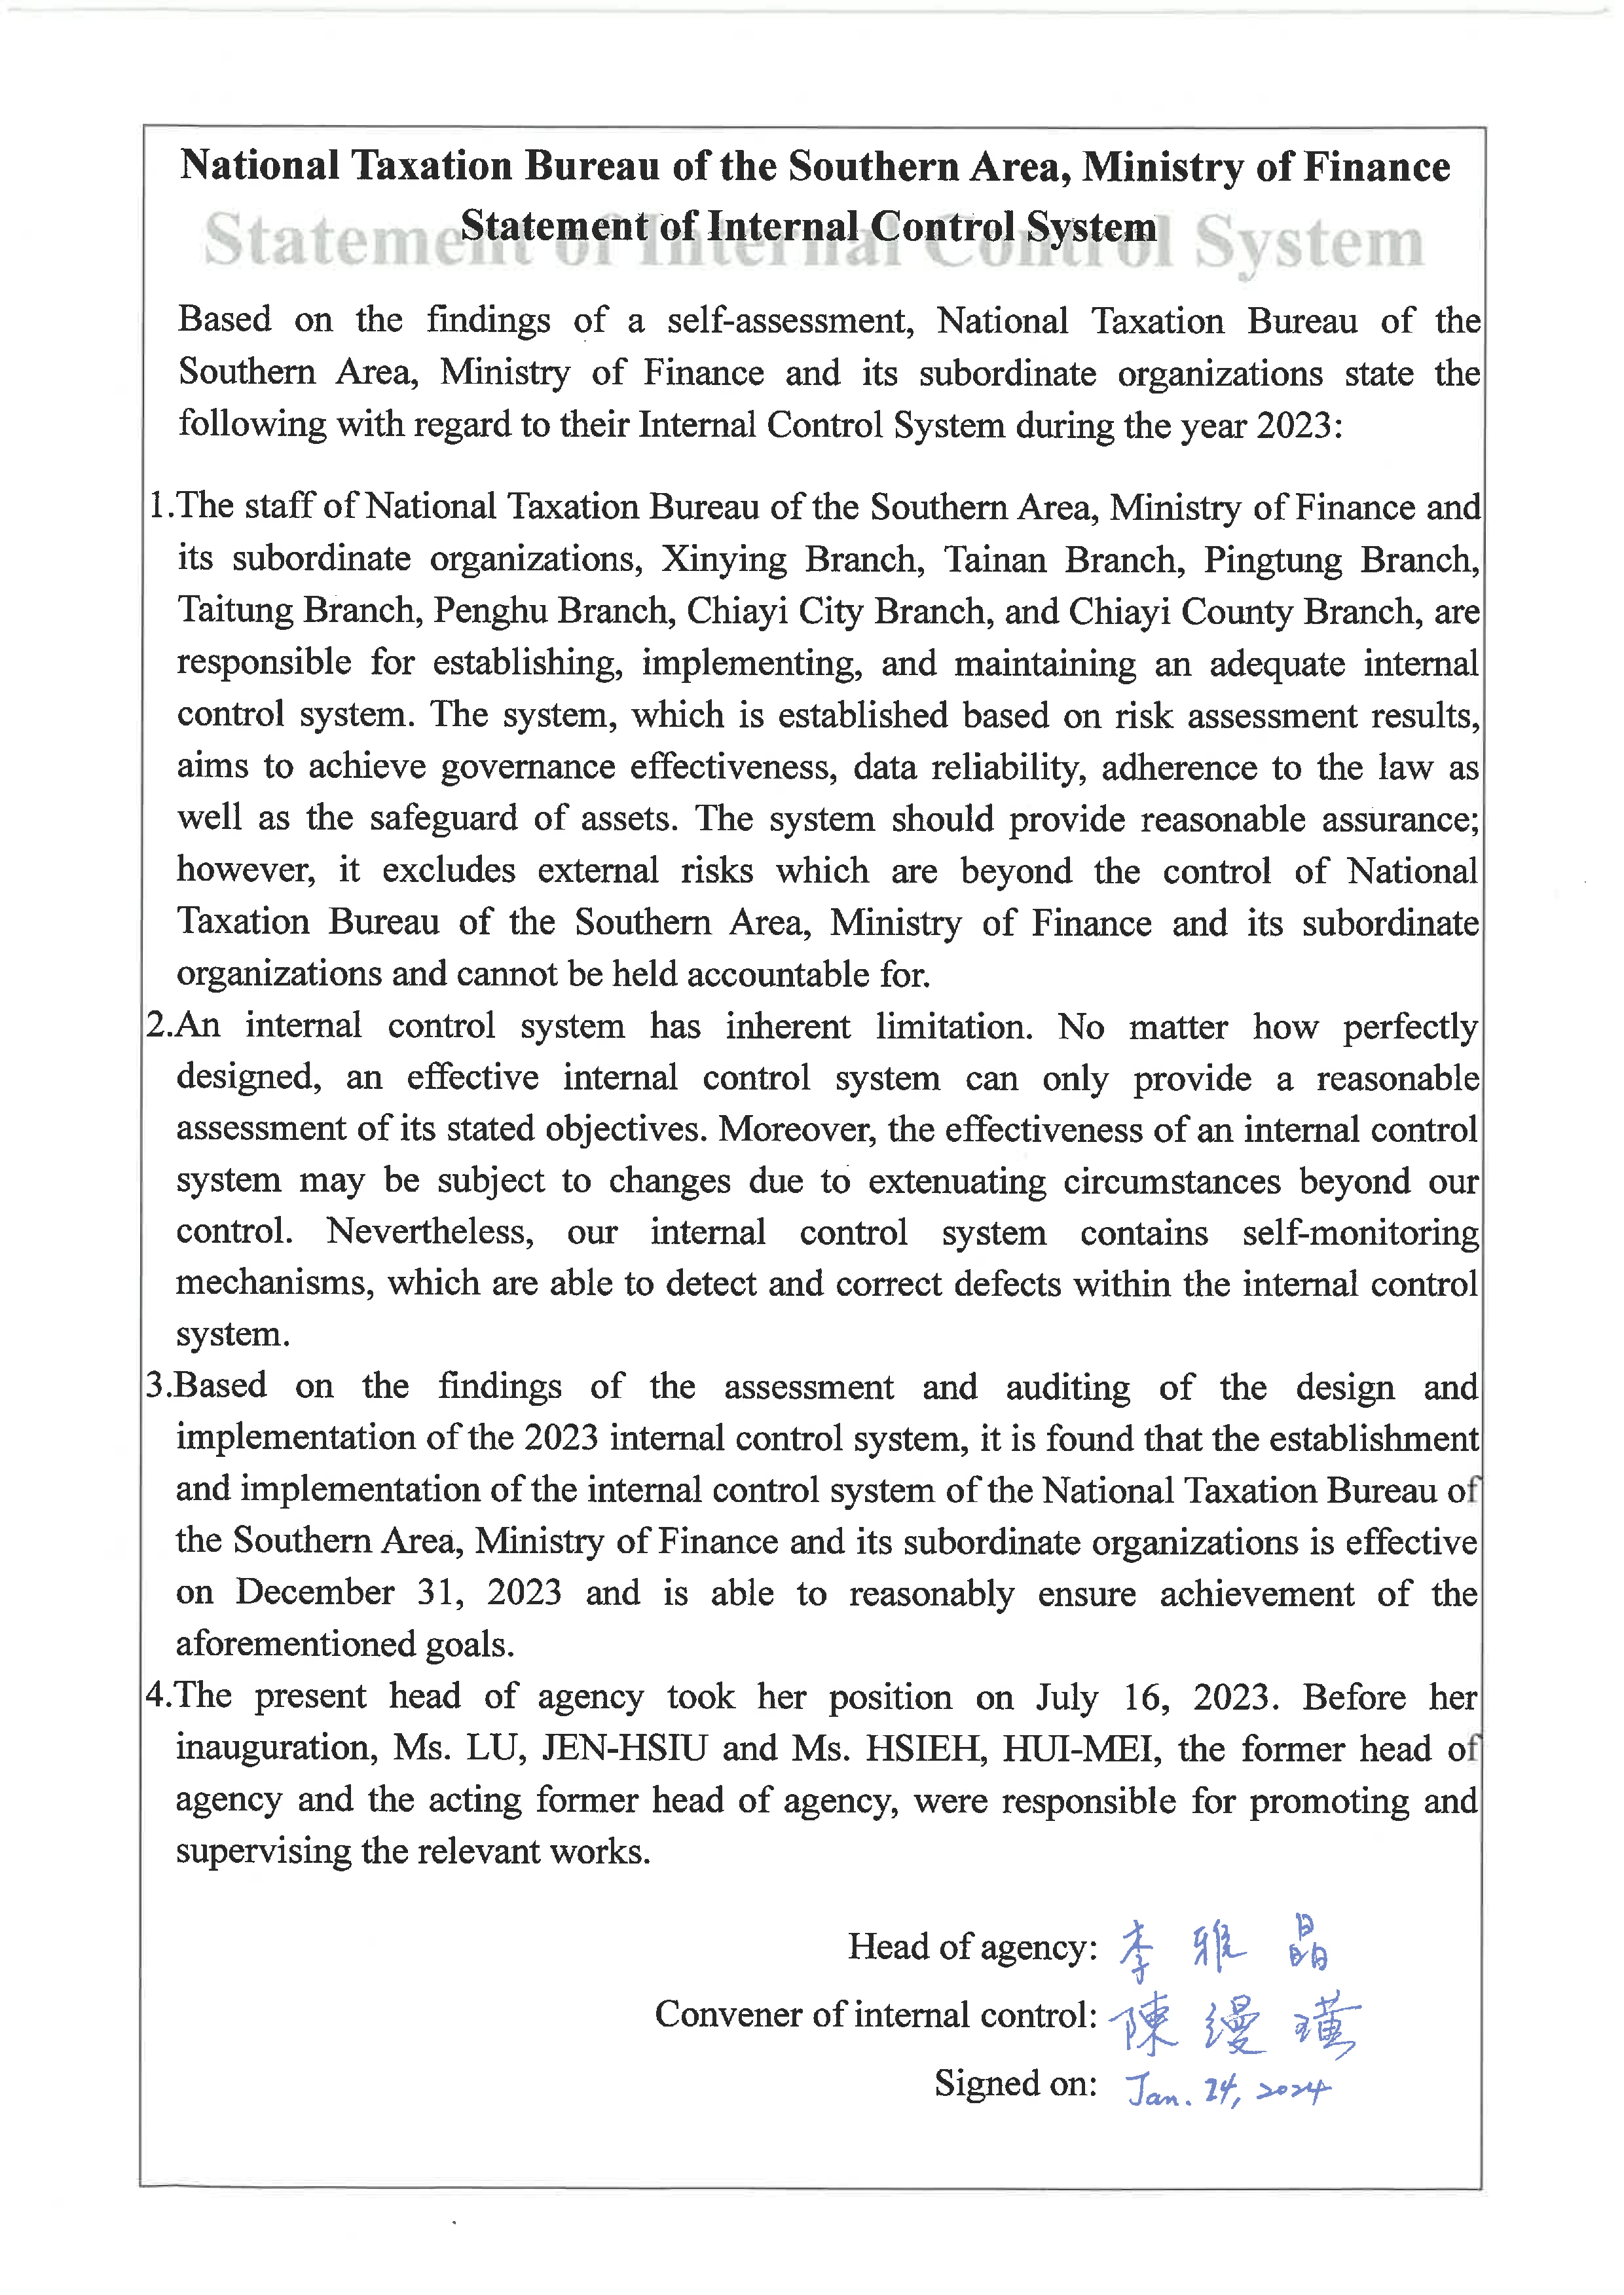 Statement of Internal Control System of year 2022